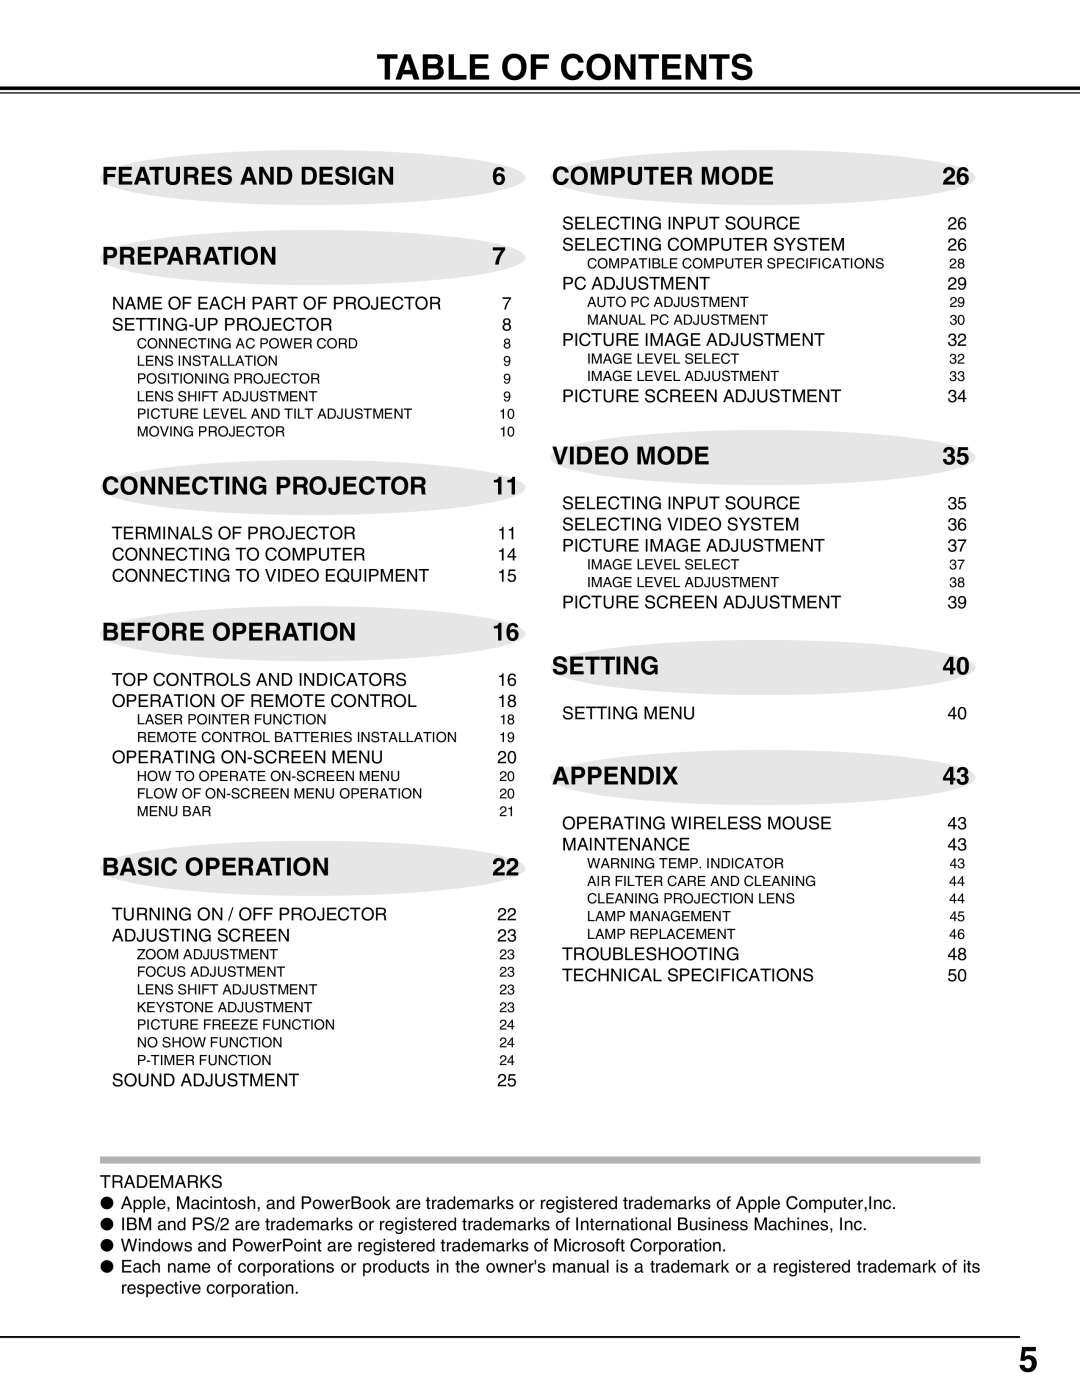 Eiki LC-UXT3 Table Of Contents, Features And Design, Computer Mode, Preparation, Connecting Projector, Video Mode, Setting 